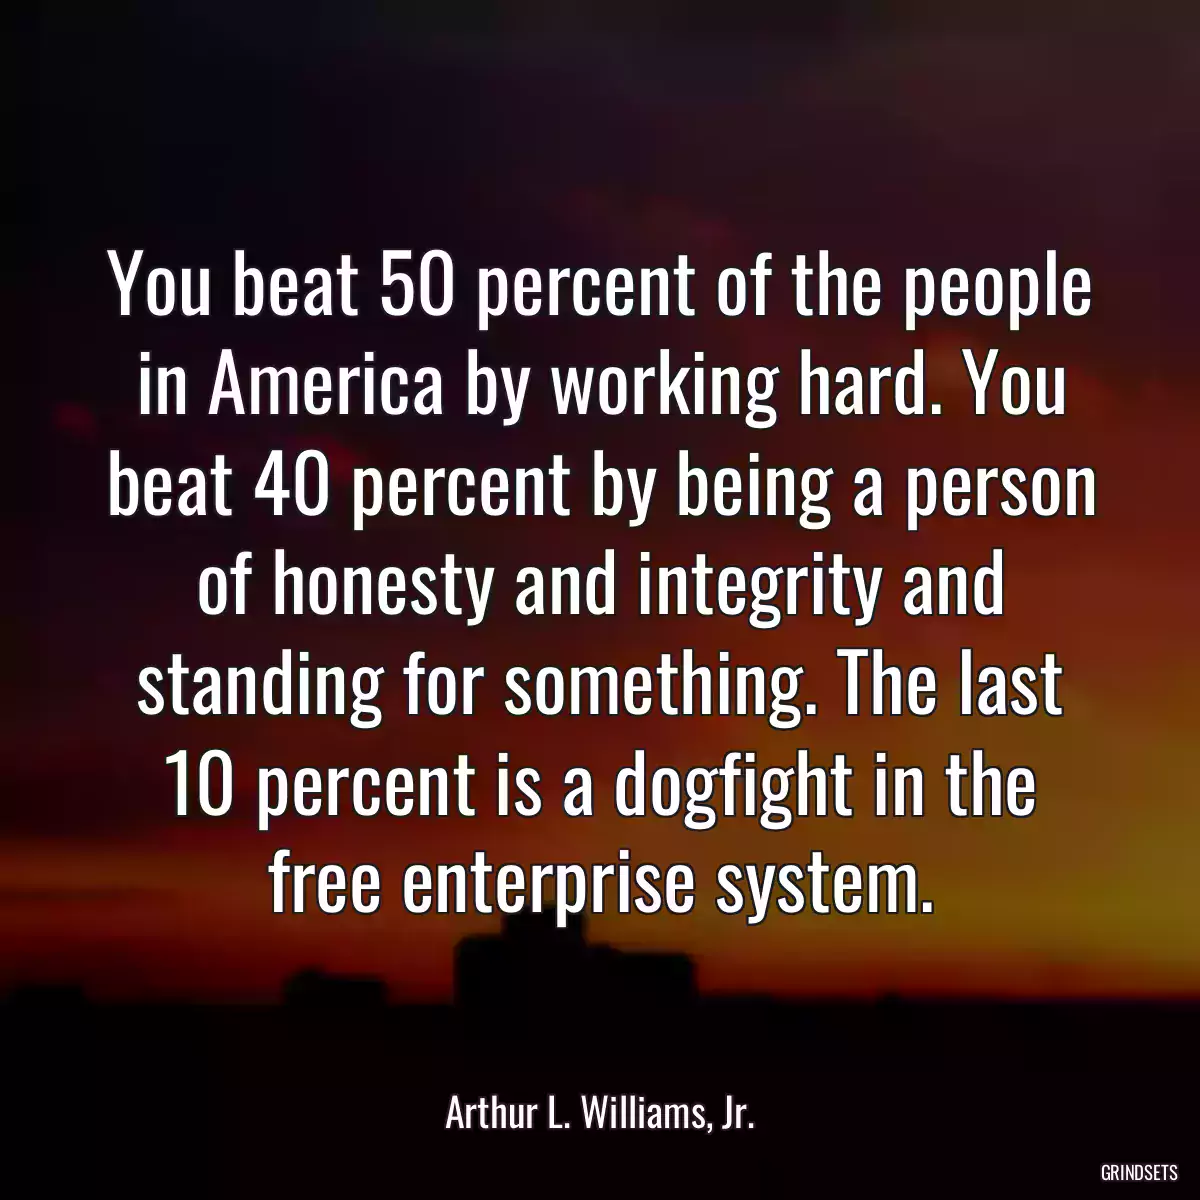 You beat 50 percent of the people in America by working hard. You beat 40 percent by being a person of honesty and integrity and standing for something. The last 10 percent is a dogfight in the free enterprise system.